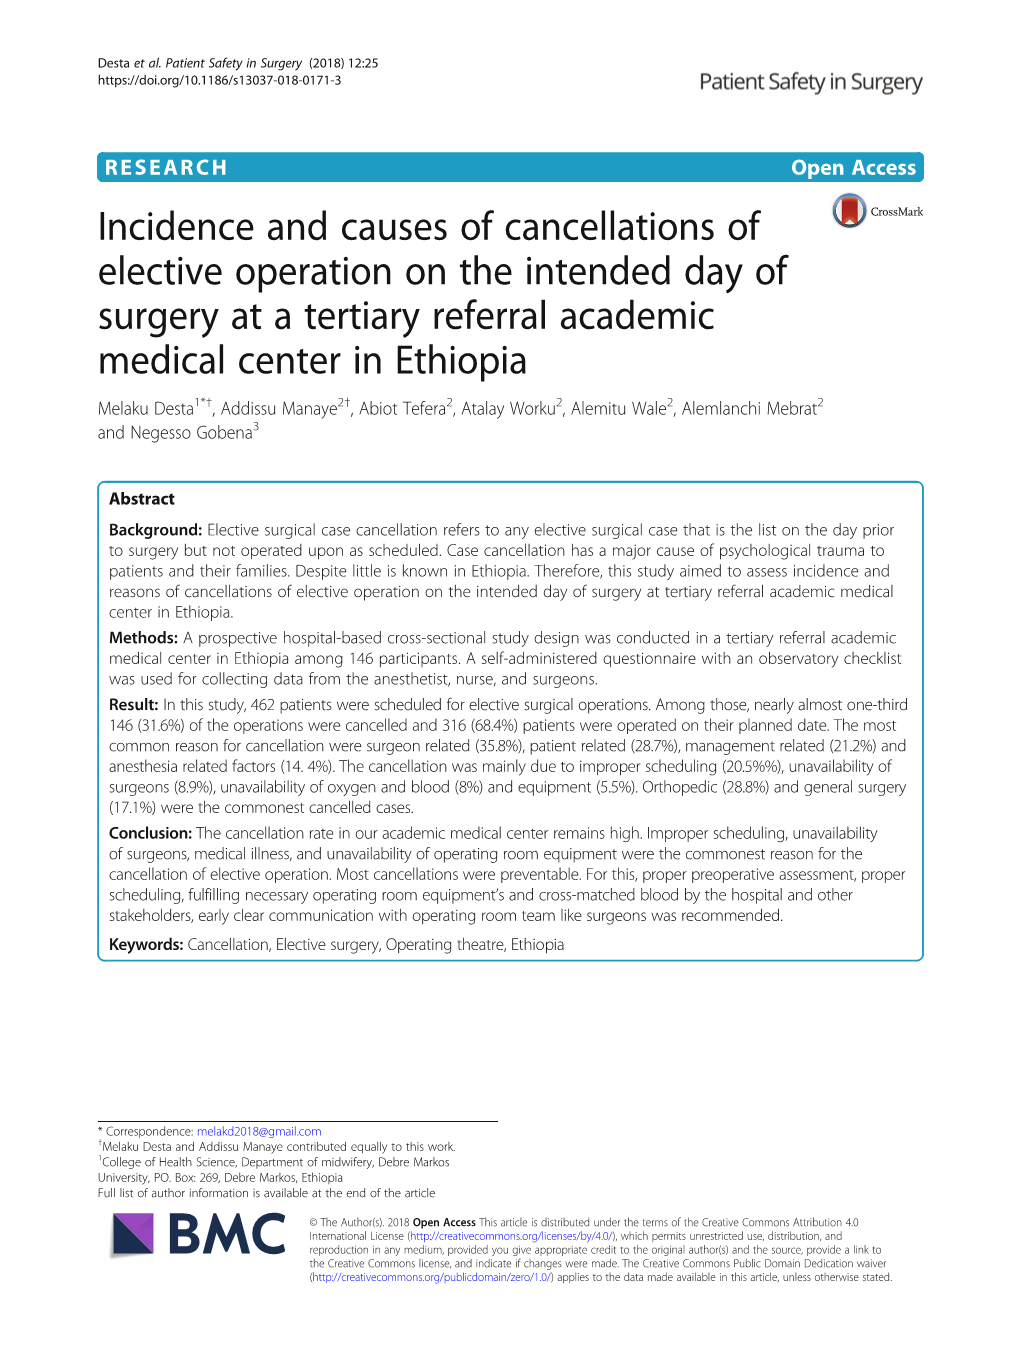 Incidence and Causes of Cancellations of Elective Operation on the Intended Day of Surgery at a Tertiary Referral Academic Medic